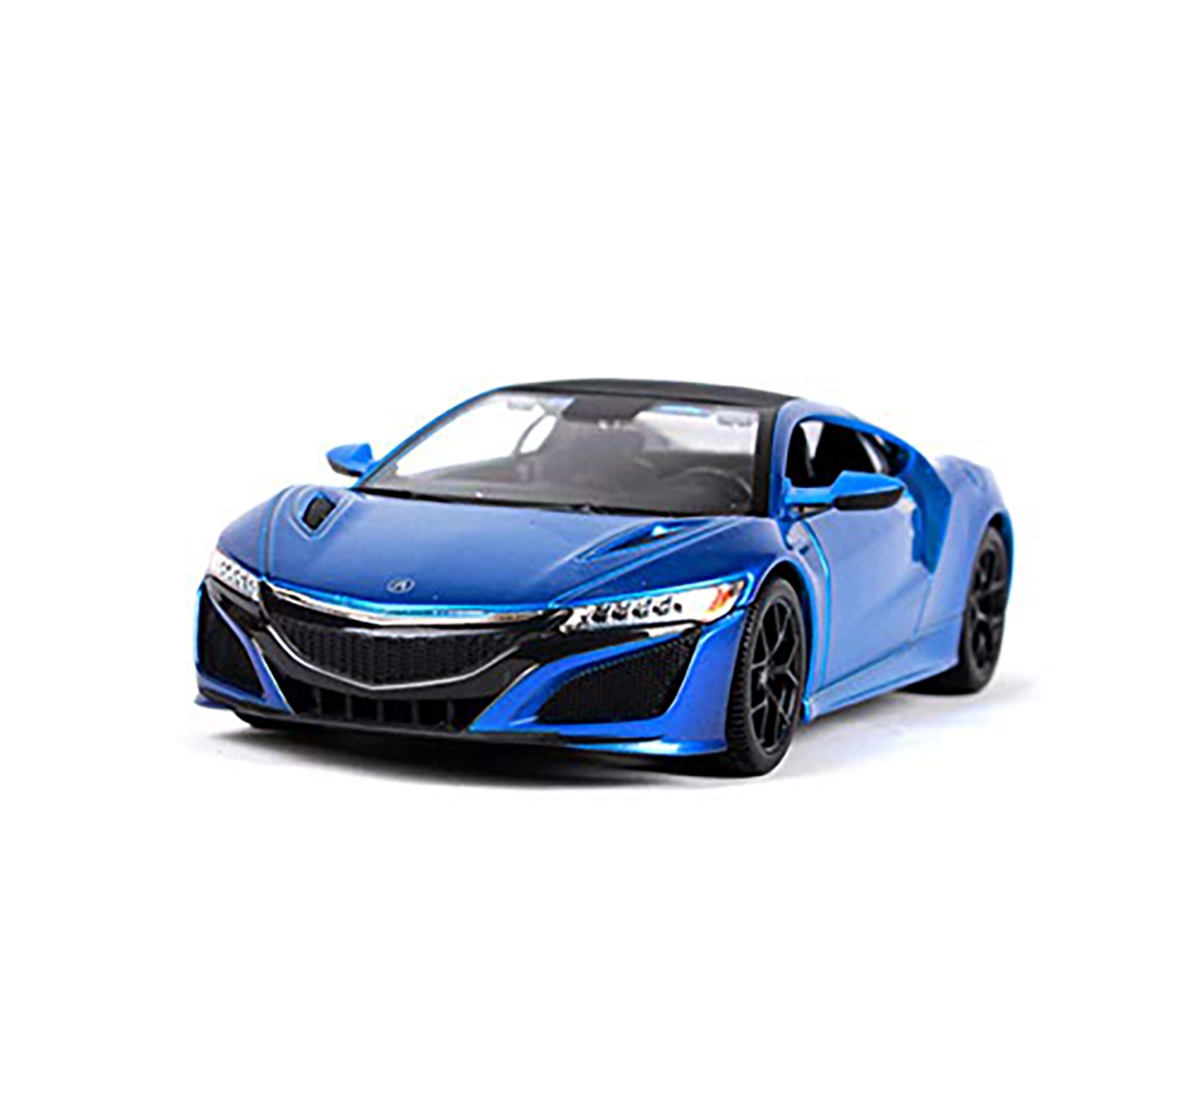 Msz | MSZ 1:31 Honda Acura NSX Car with Light and Sound for Kids age 3Y+ (Blue) 1